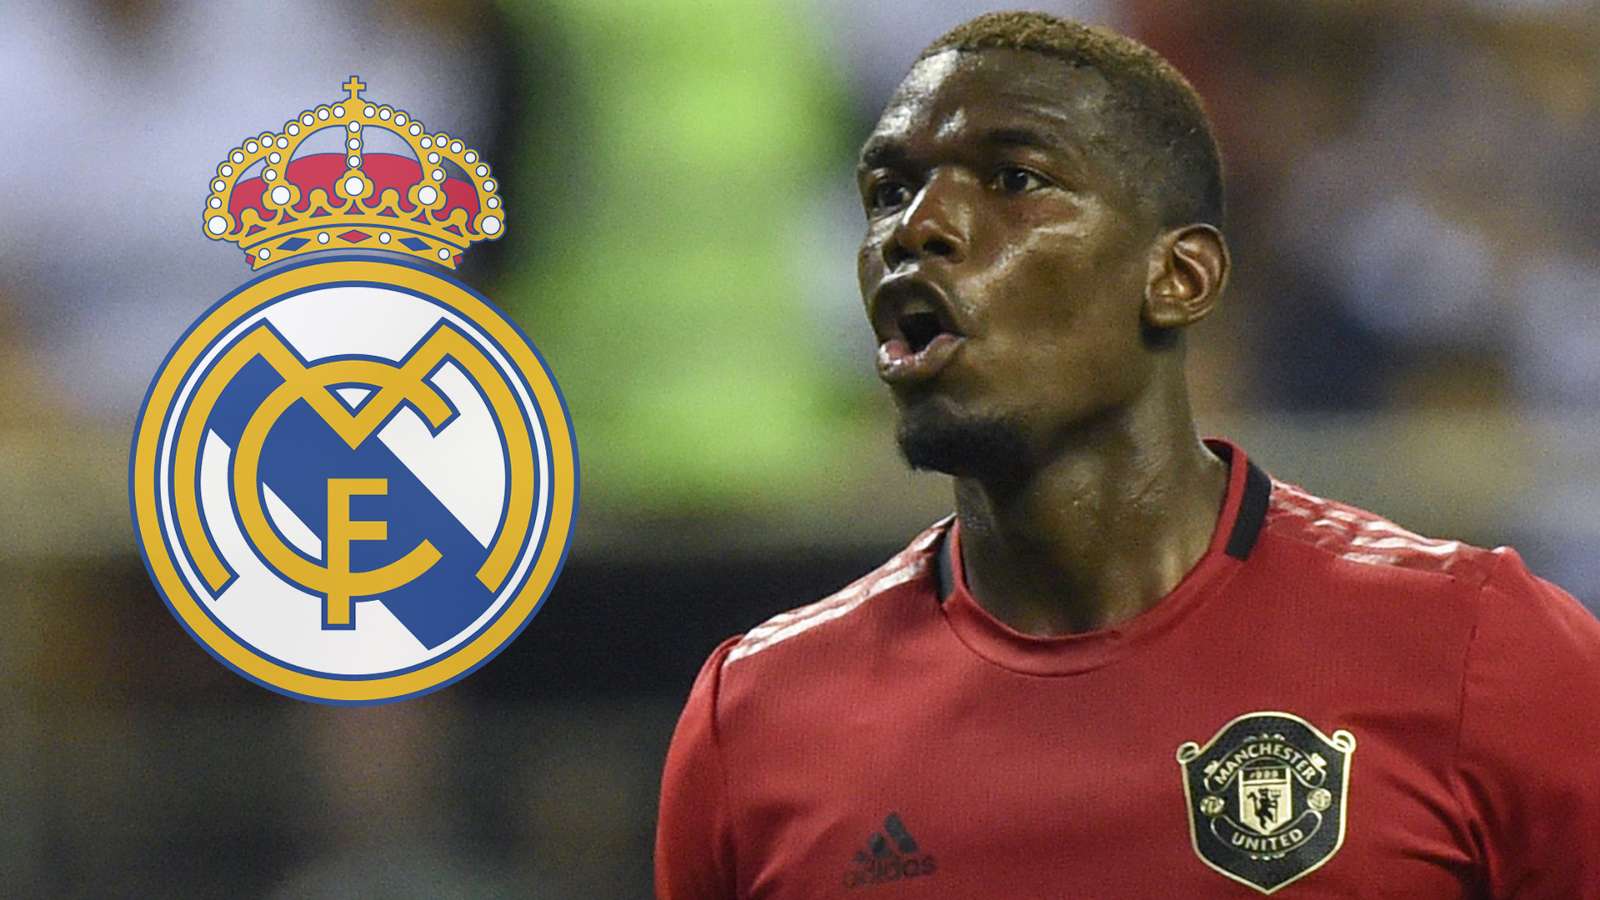 Transfer news and rumours LIVE: Man Utd reject Real Madrid offer to swap Pogba for James